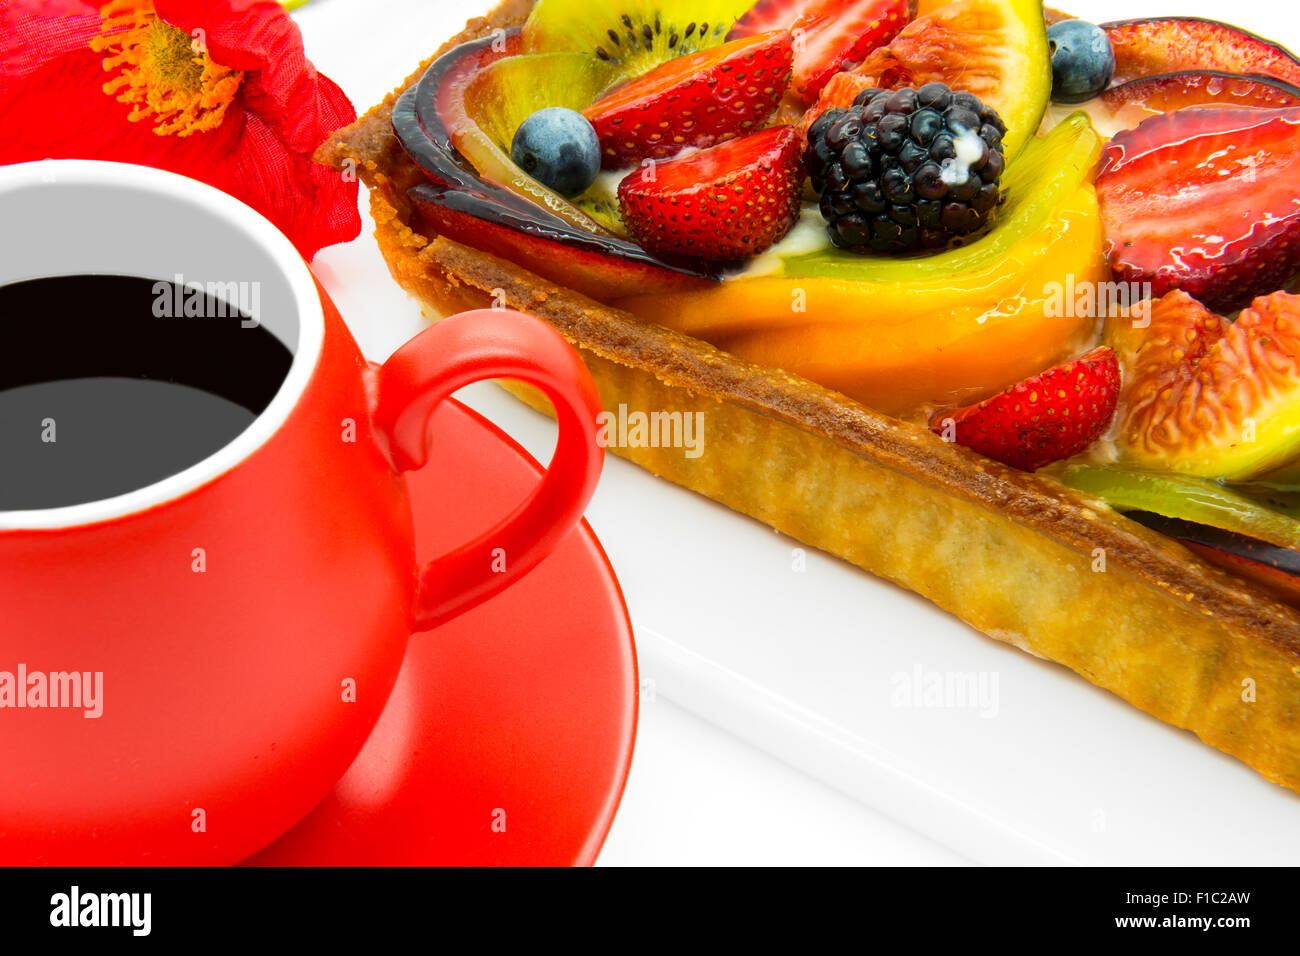 Red cup of coffee and fruit cake Stock Photo